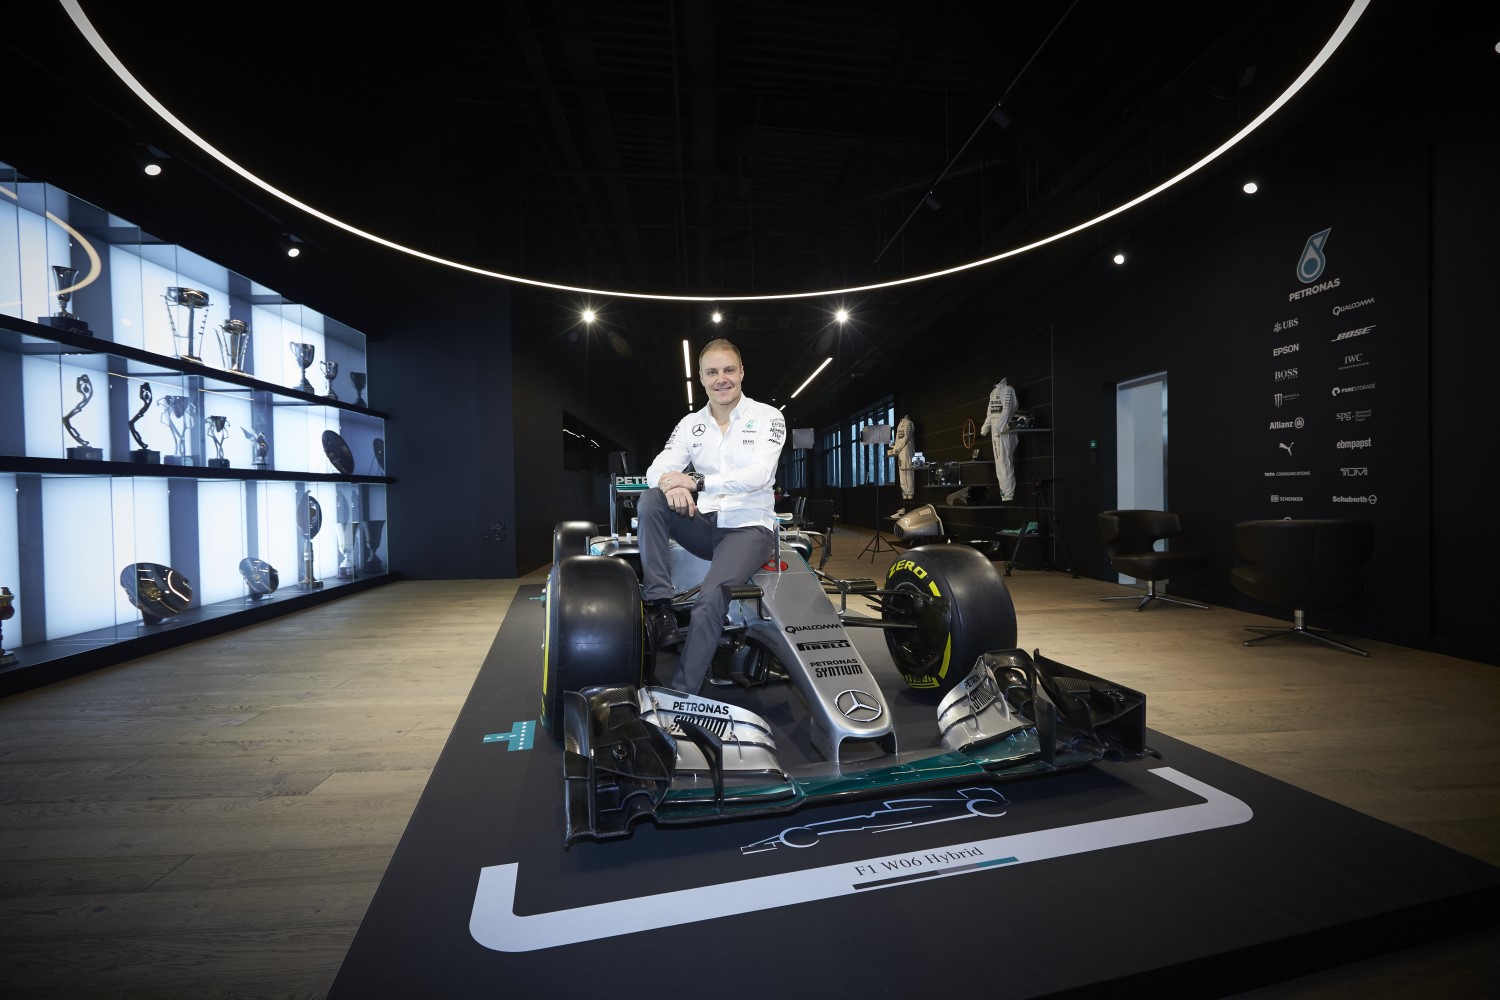 Bottas has his Mercedes ride while Wehrlein and Massa have theirs